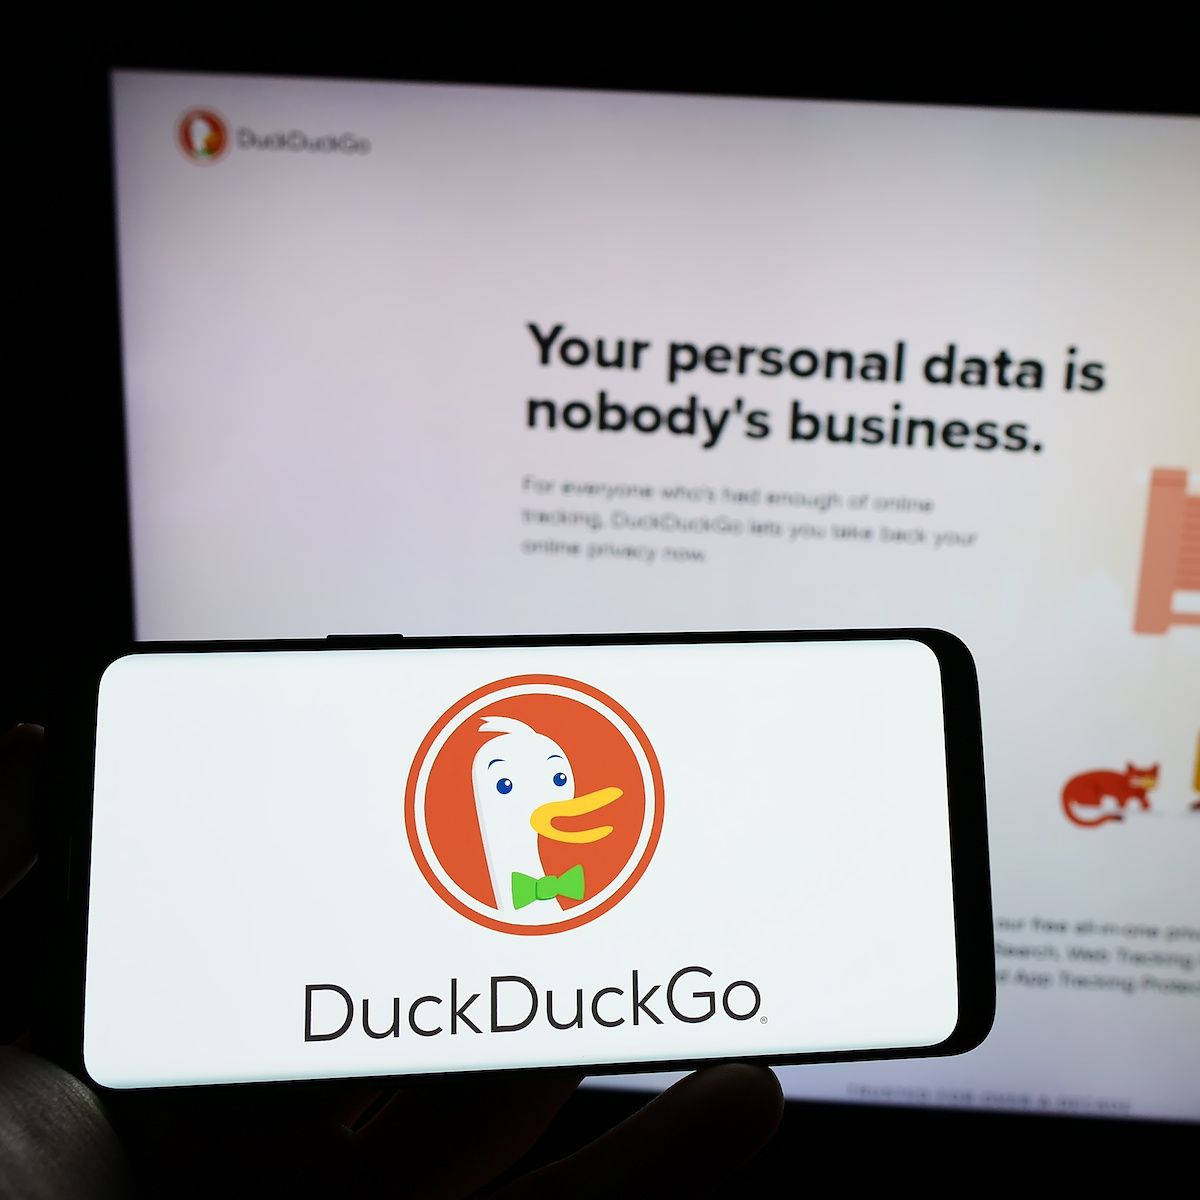 A hand holds a cell phone with the DuckDuckGo logo on the screen in front of the DuckDuckGo webpage.